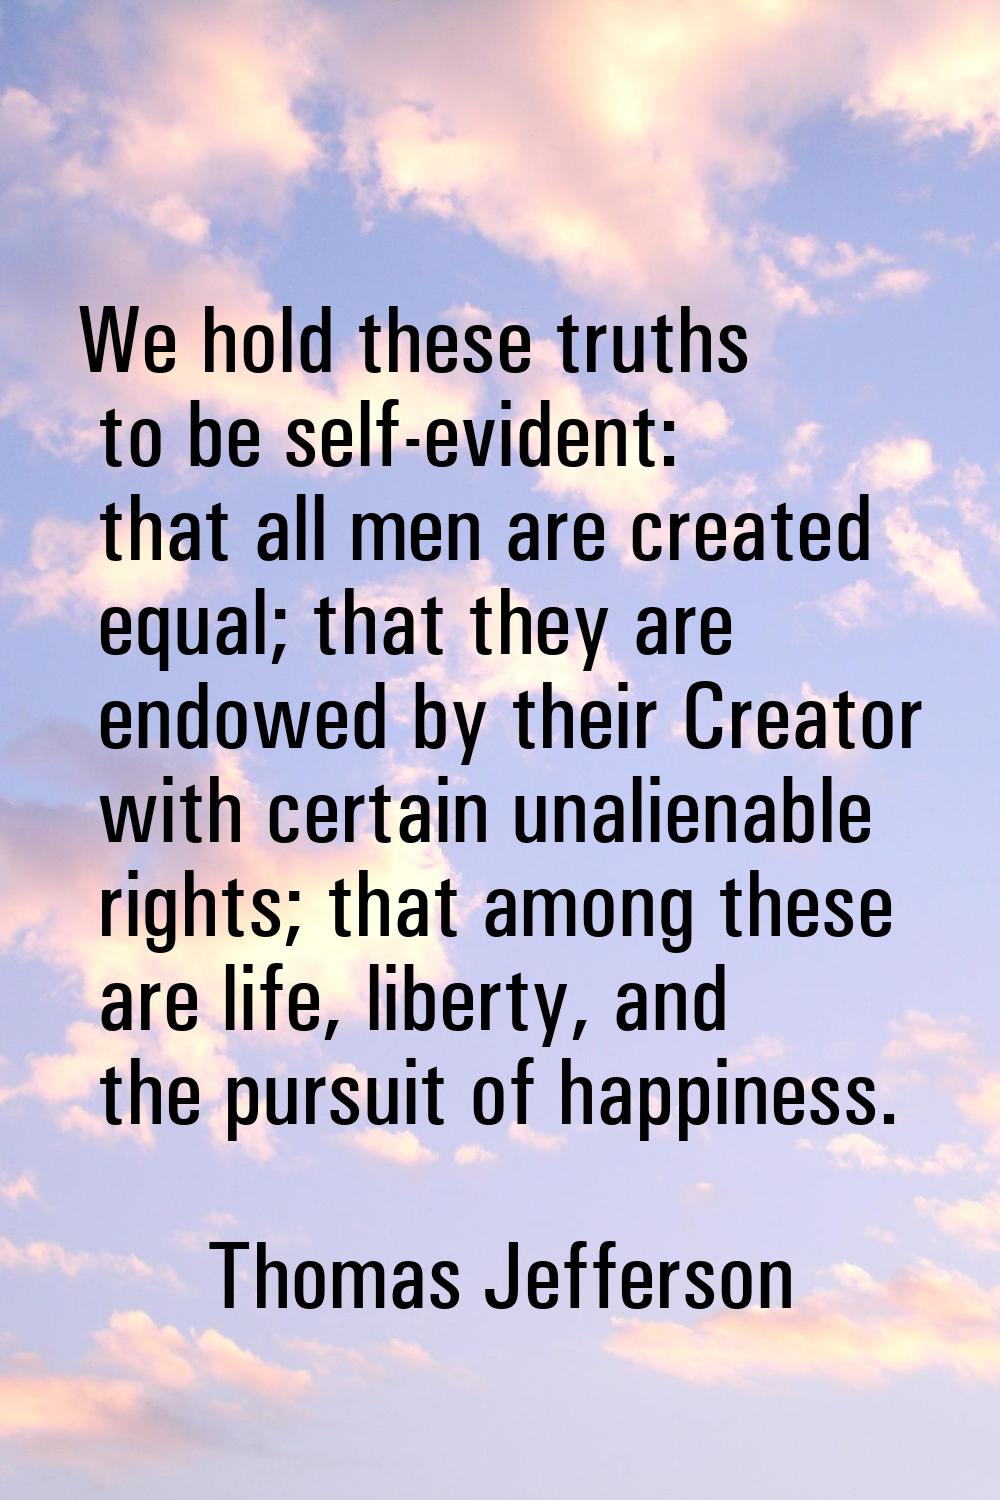 We hold these truths to be self-evident: that all men are created equal; that they are endowed by t